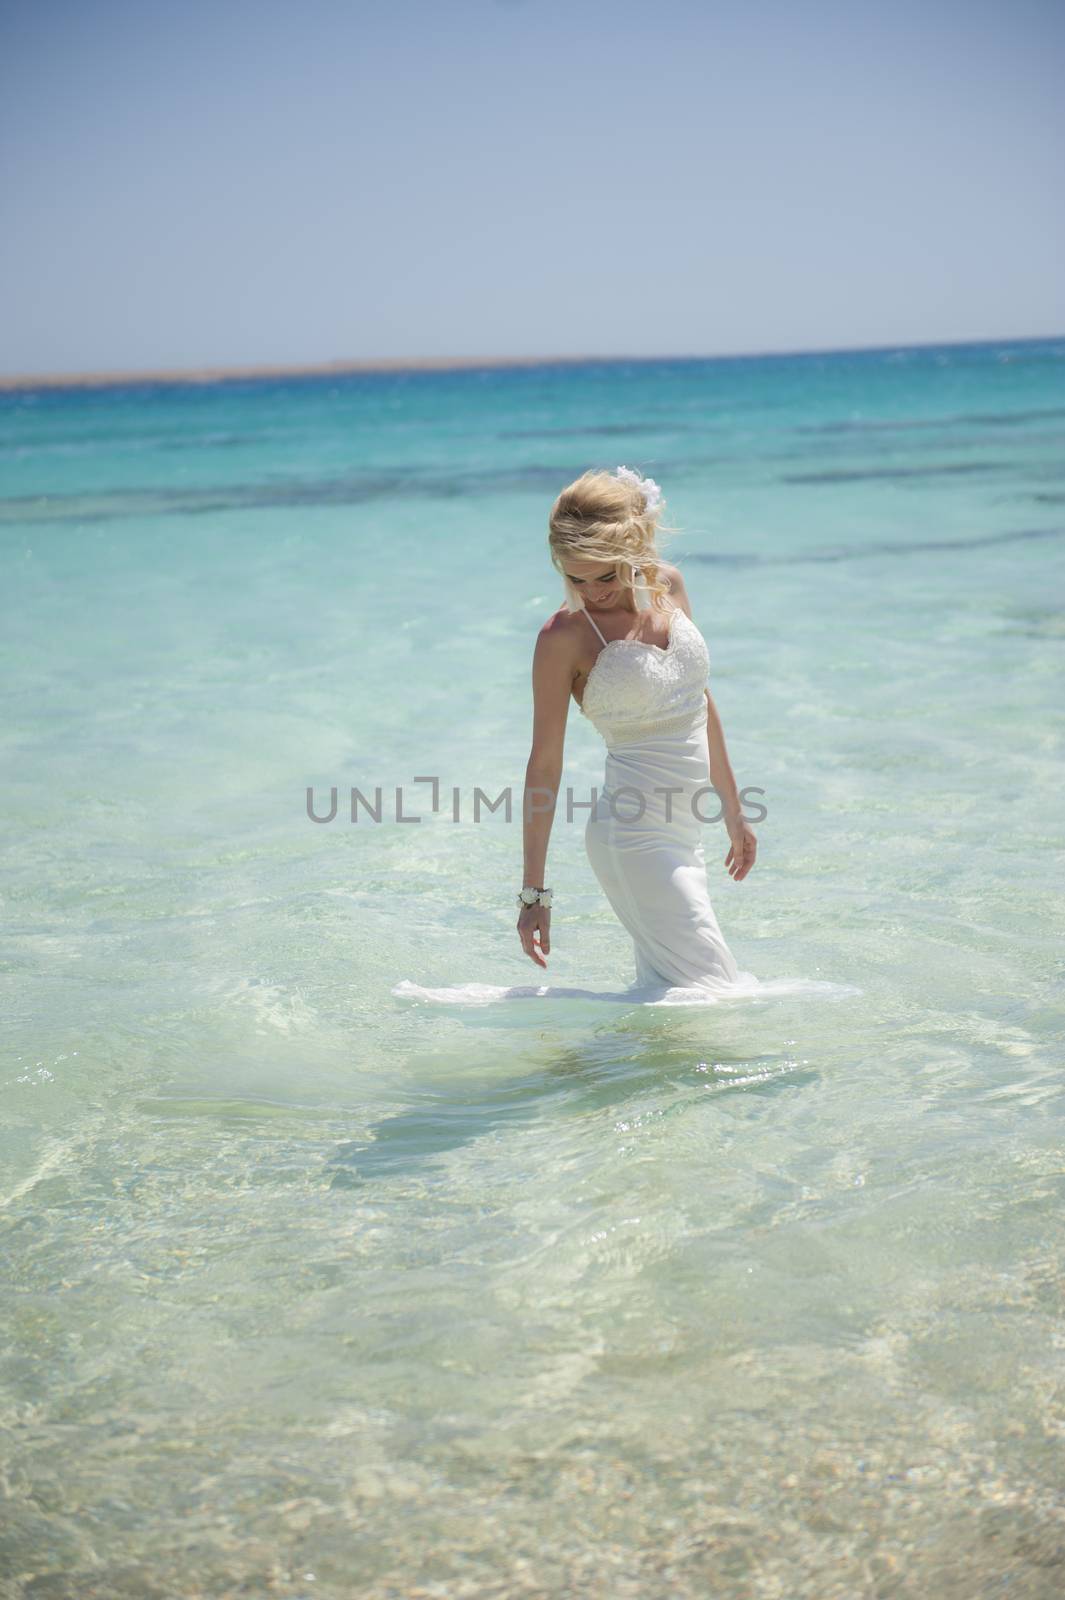 Beautiful woman bride at a tropical beach paradise on wedding day in white gown dress with ocean view walking through water